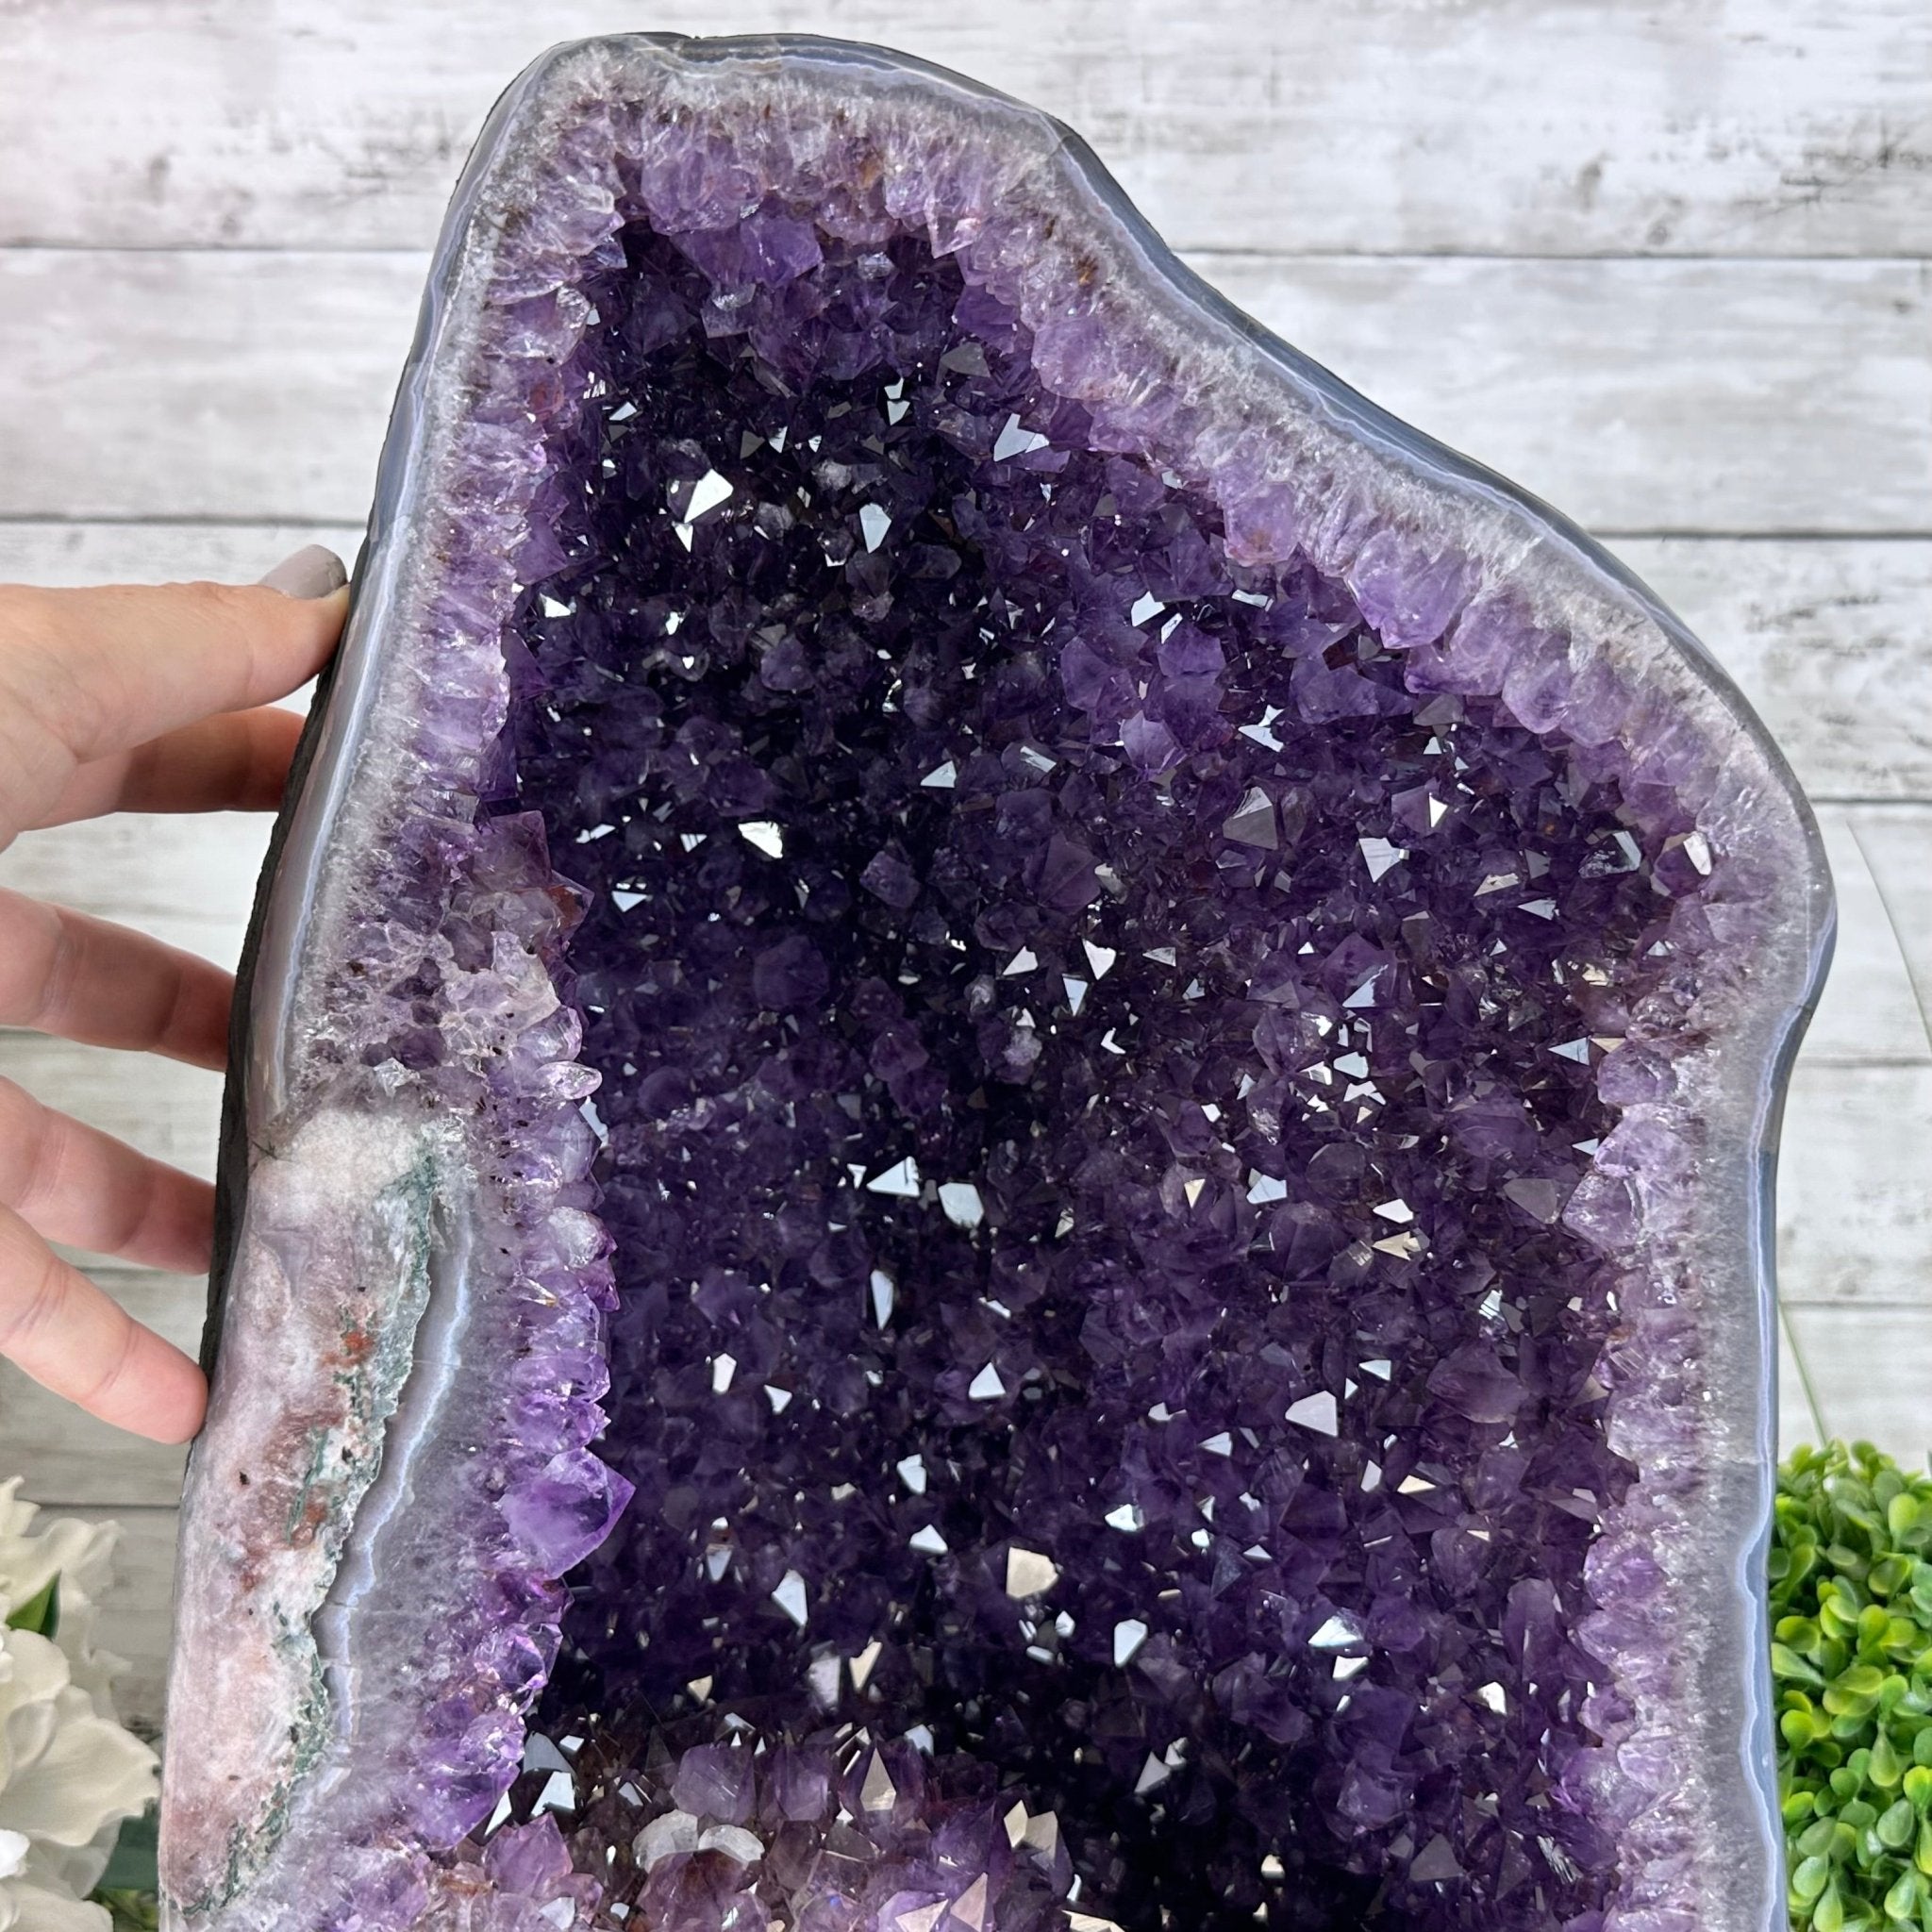 Extra Plus Quality Brazilian Amethyst Cathedral, 47.2 lbs & 17" Tall, Model #5601-1083 by Brazil Gems - Brazil GemsBrazil GemsExtra Plus Quality Brazilian Amethyst Cathedral, 47.2 lbs & 17" Tall, Model #5601-1083 by Brazil GemsCathedrals5601-1083